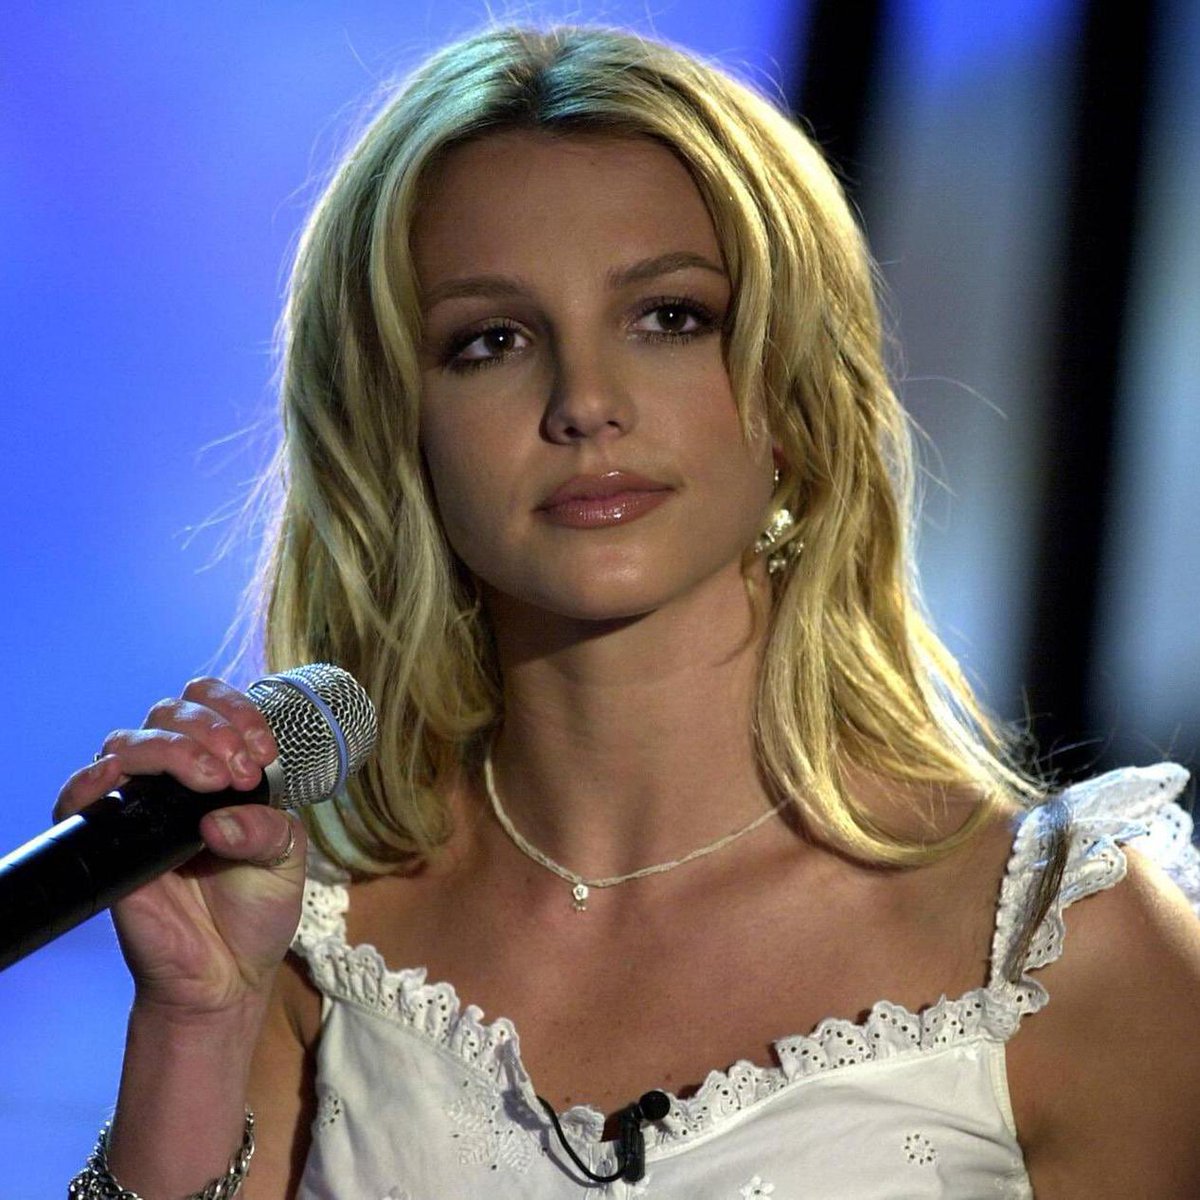 Britney Spears CAN sing and here’s proof: A thread